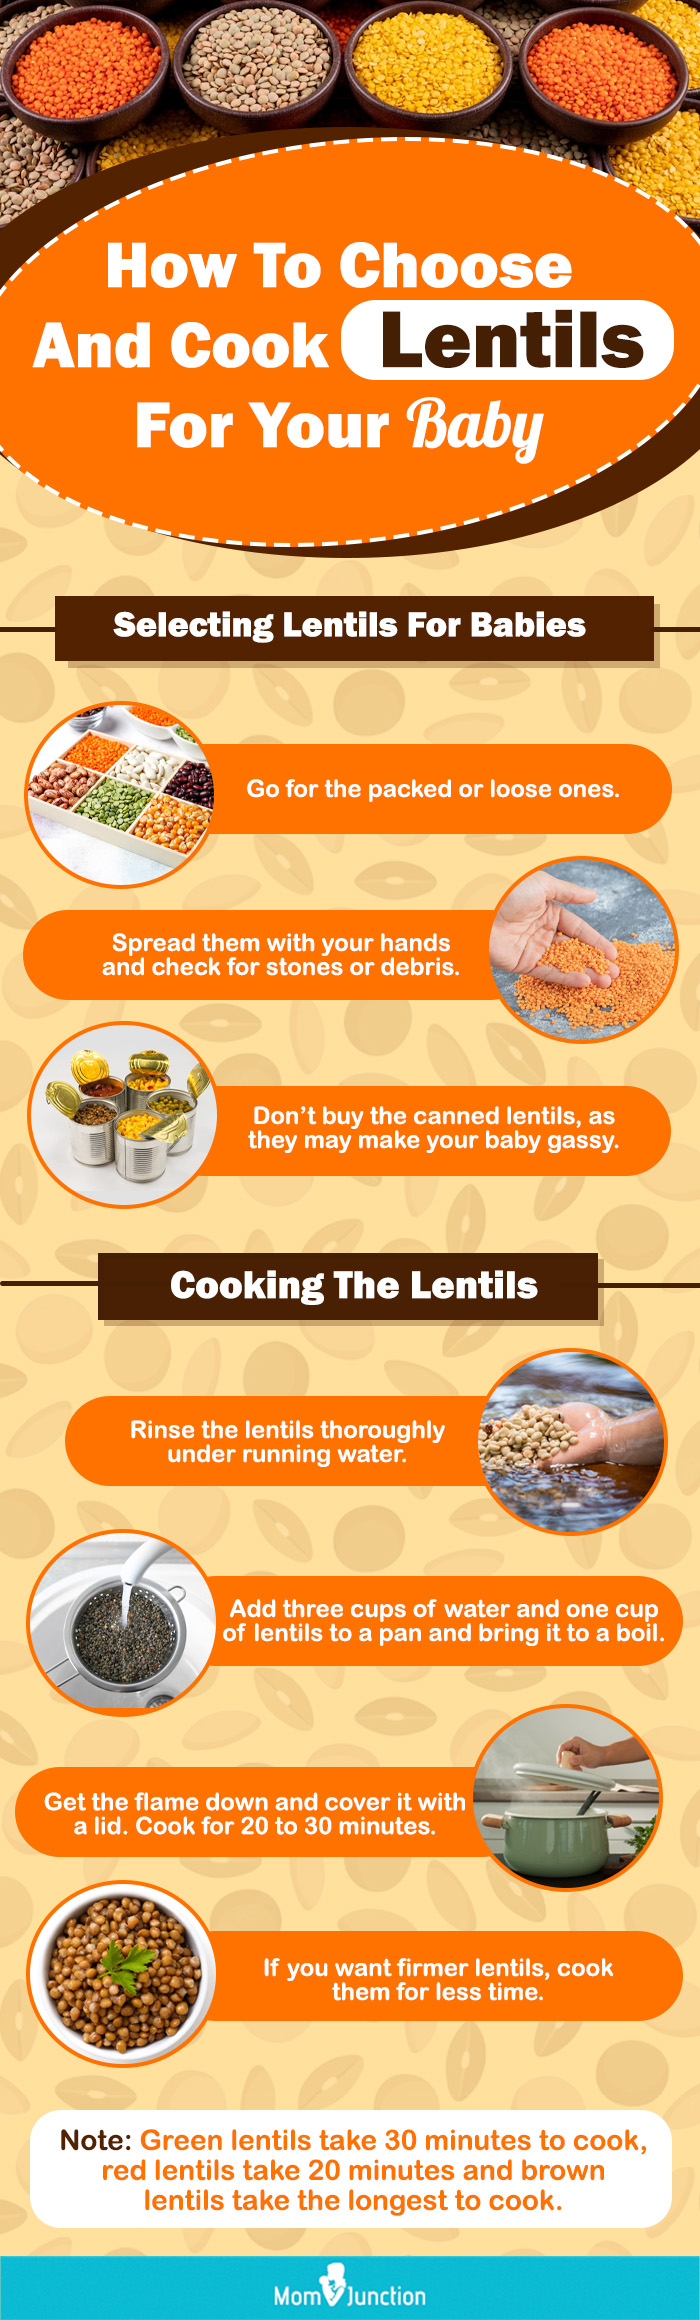 how to choose and cook lentils for your baby (infographic)